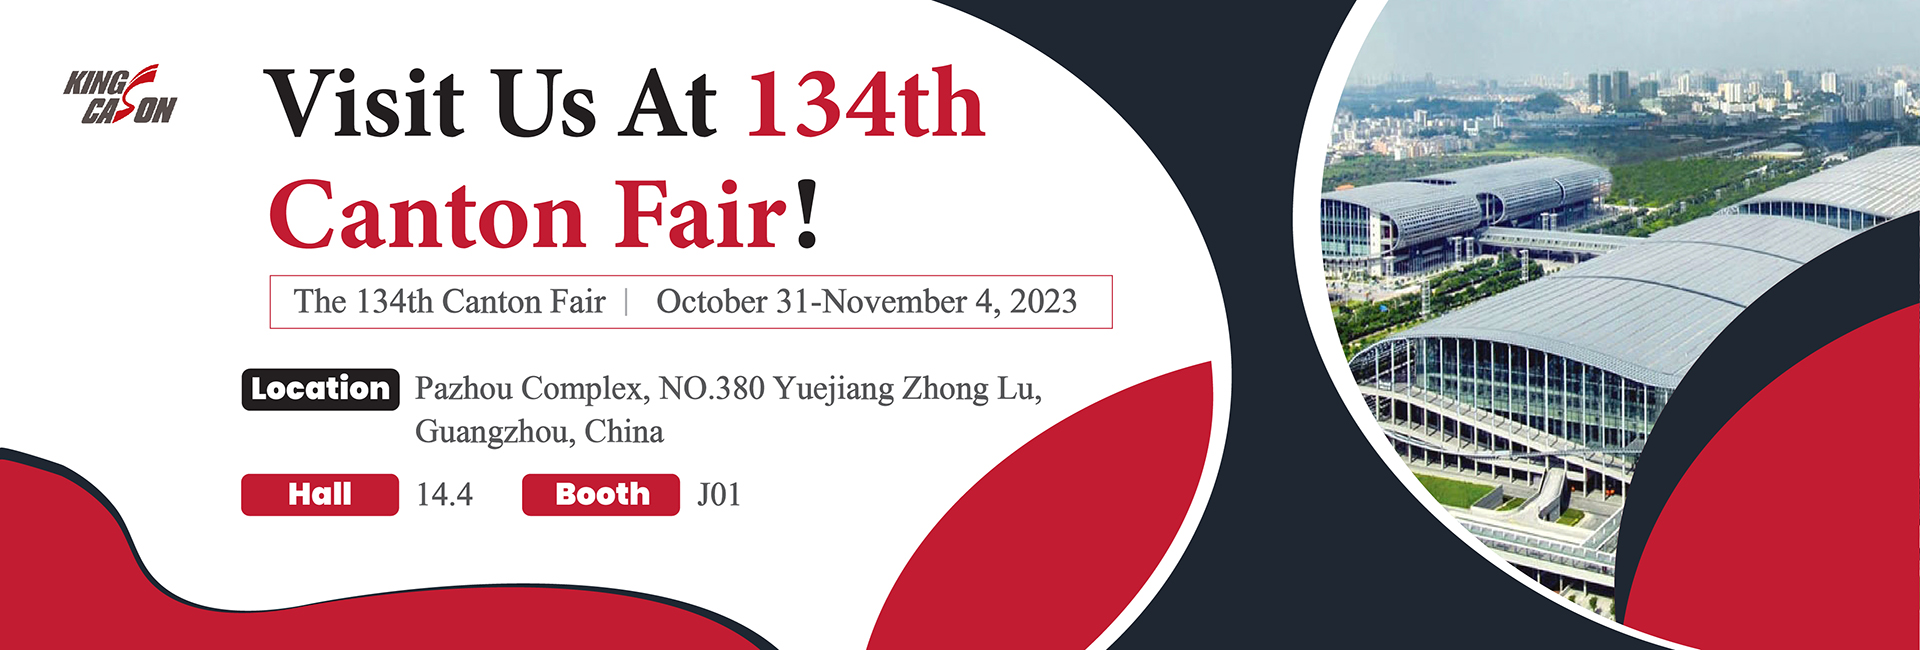 Meet us at the 134th Canton Fair Welcome to Booth J01, Hall 14 (1)